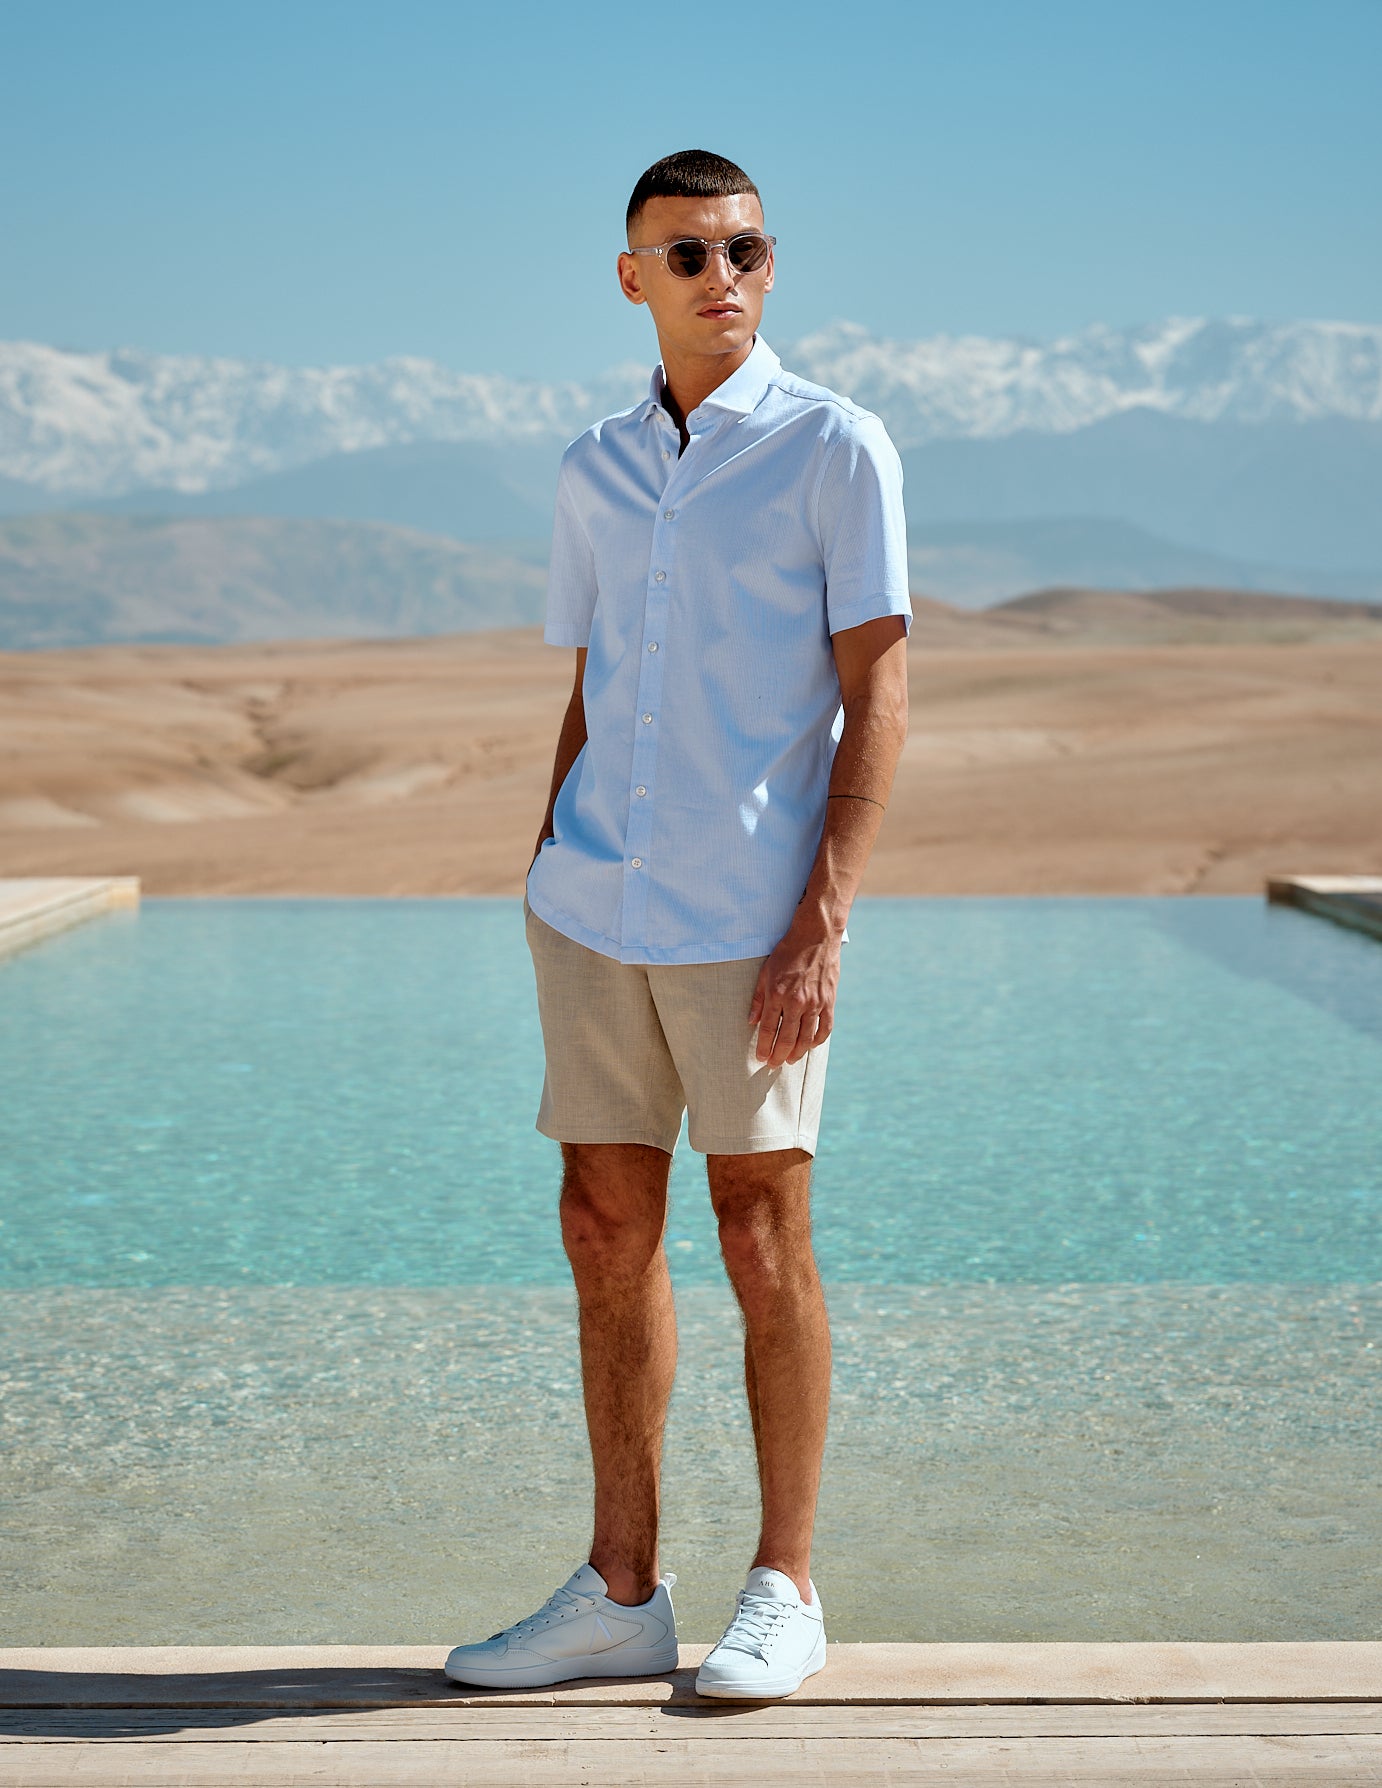 Male model wearing beige shorts, light blue short-sleeved shirt and sunglasses standing in a nature summer setting